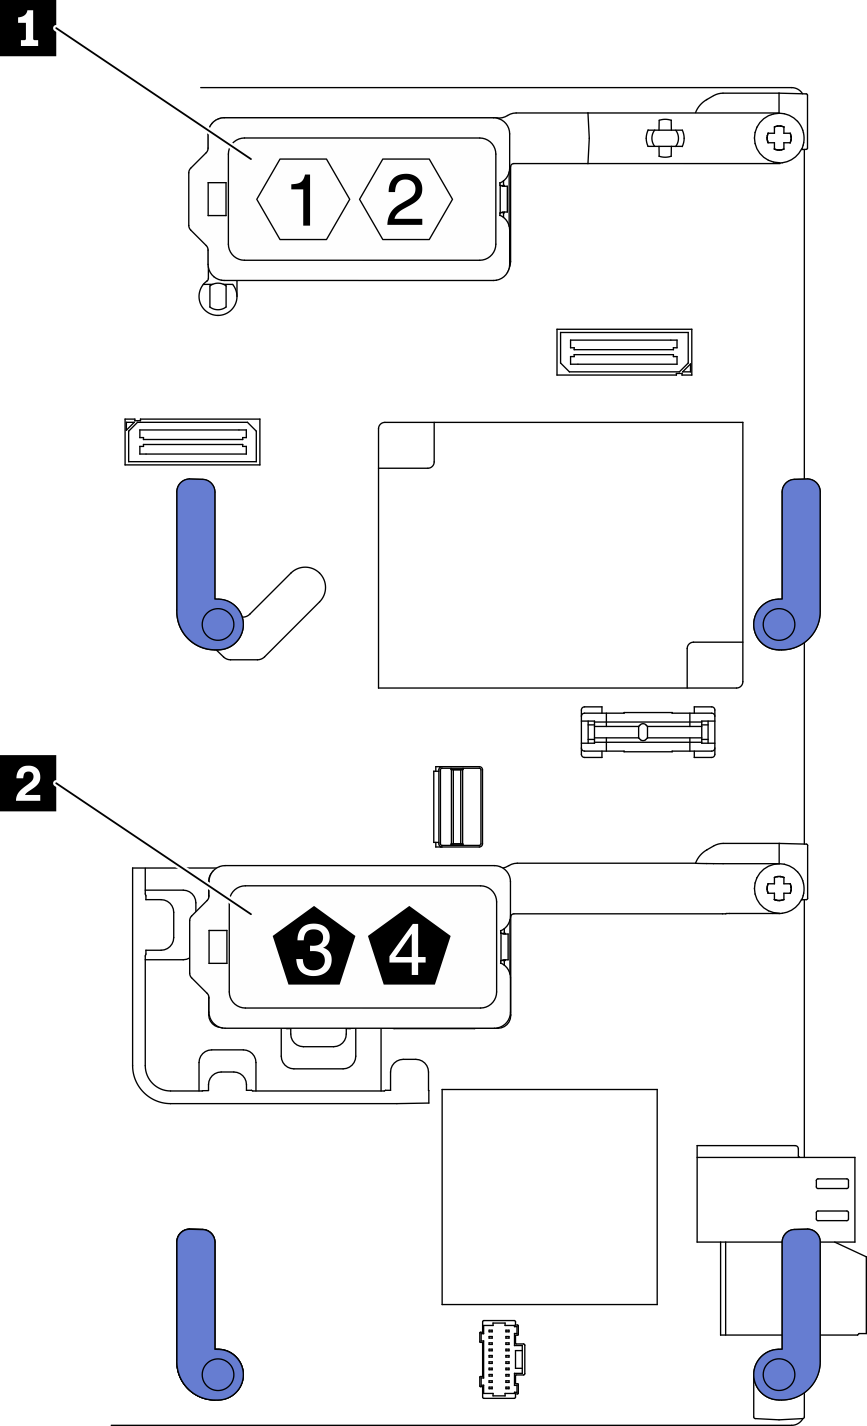 I/O expansion adapter connectors numbering and shape